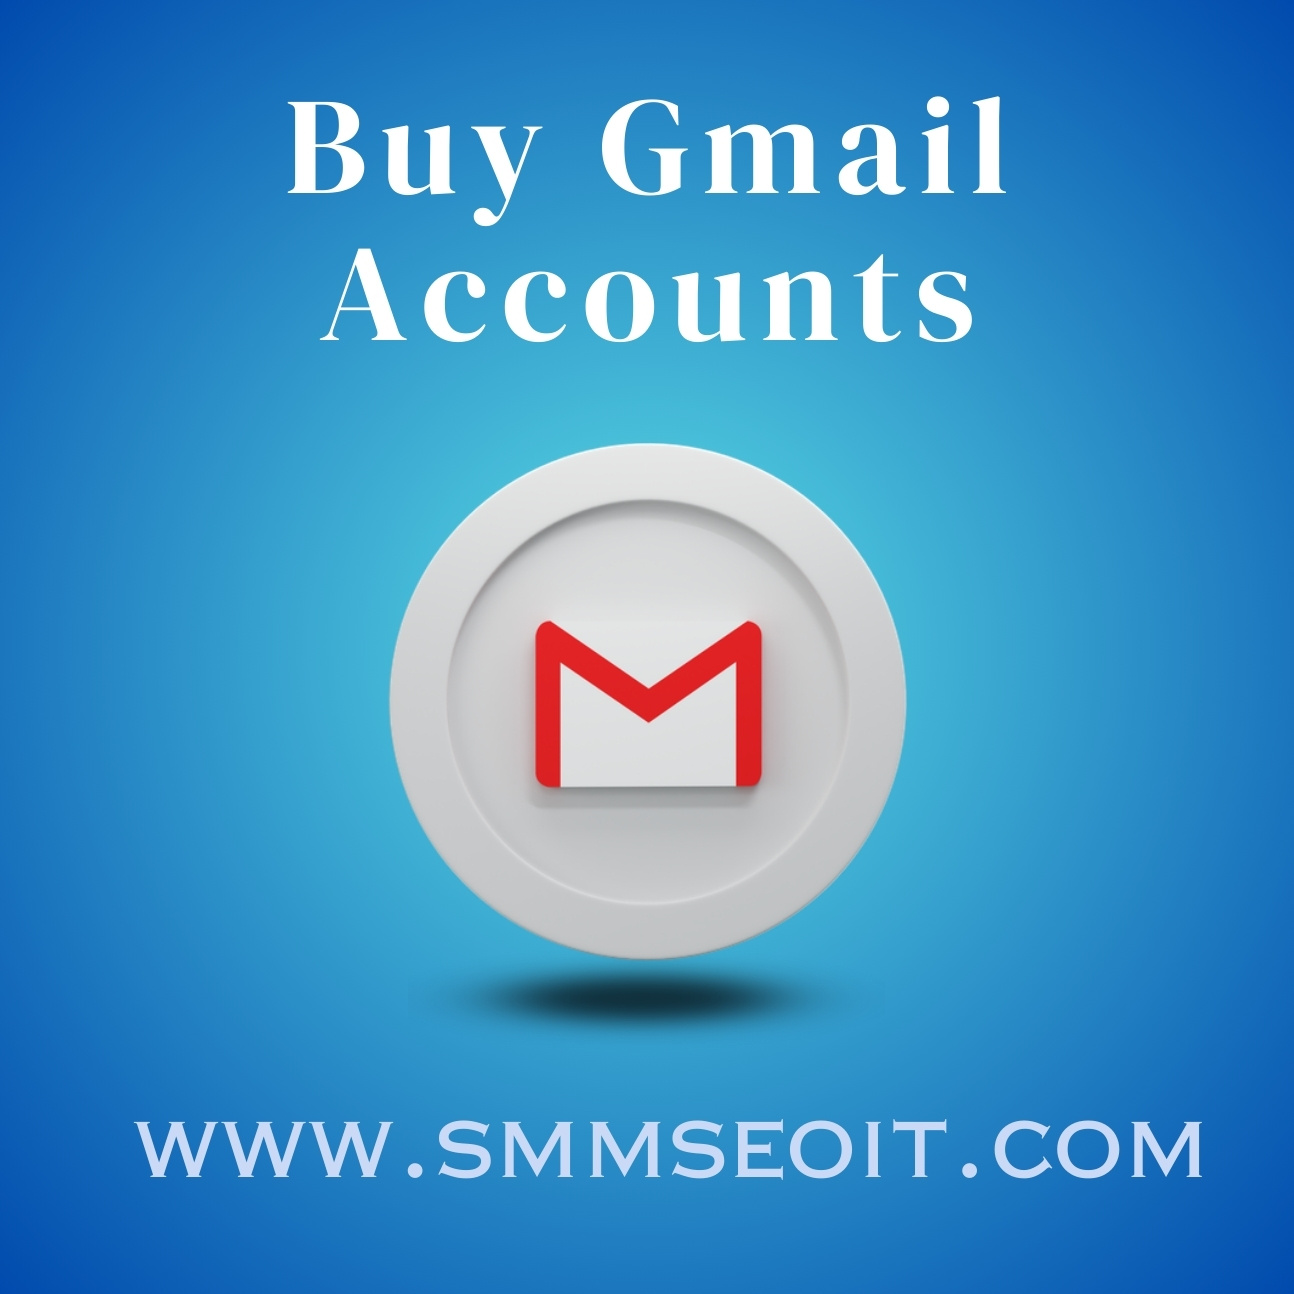 Buy Gmail Accounts - 100% Real PVA Old & Best Quality